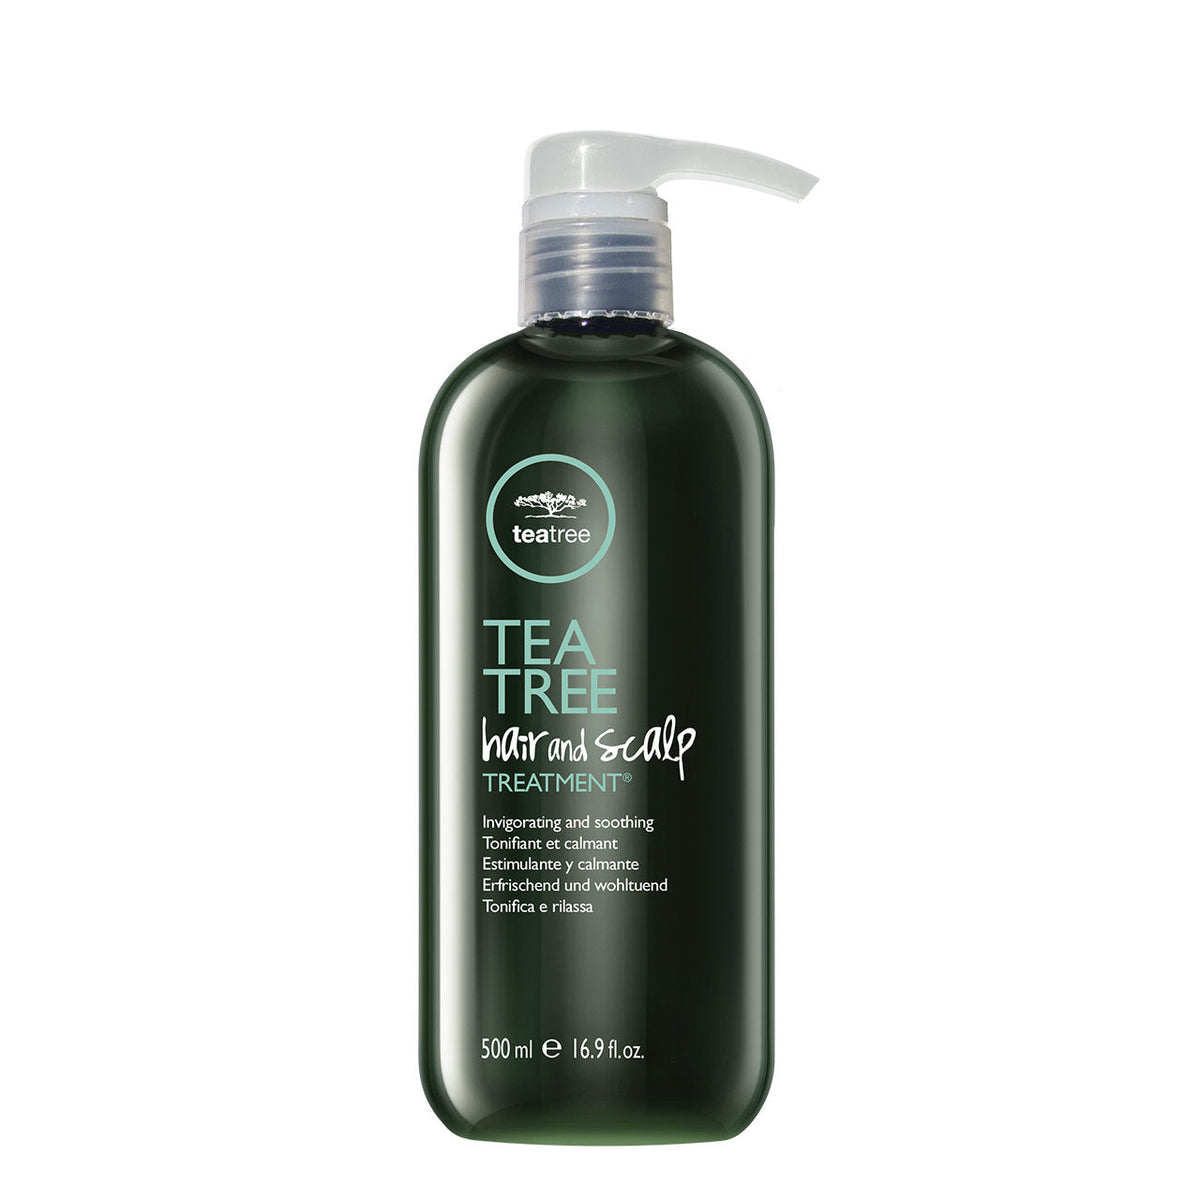 Tea Tree Hair and Scalp Treatment - 500ML - ProCare Outlet by Paul Mitchell